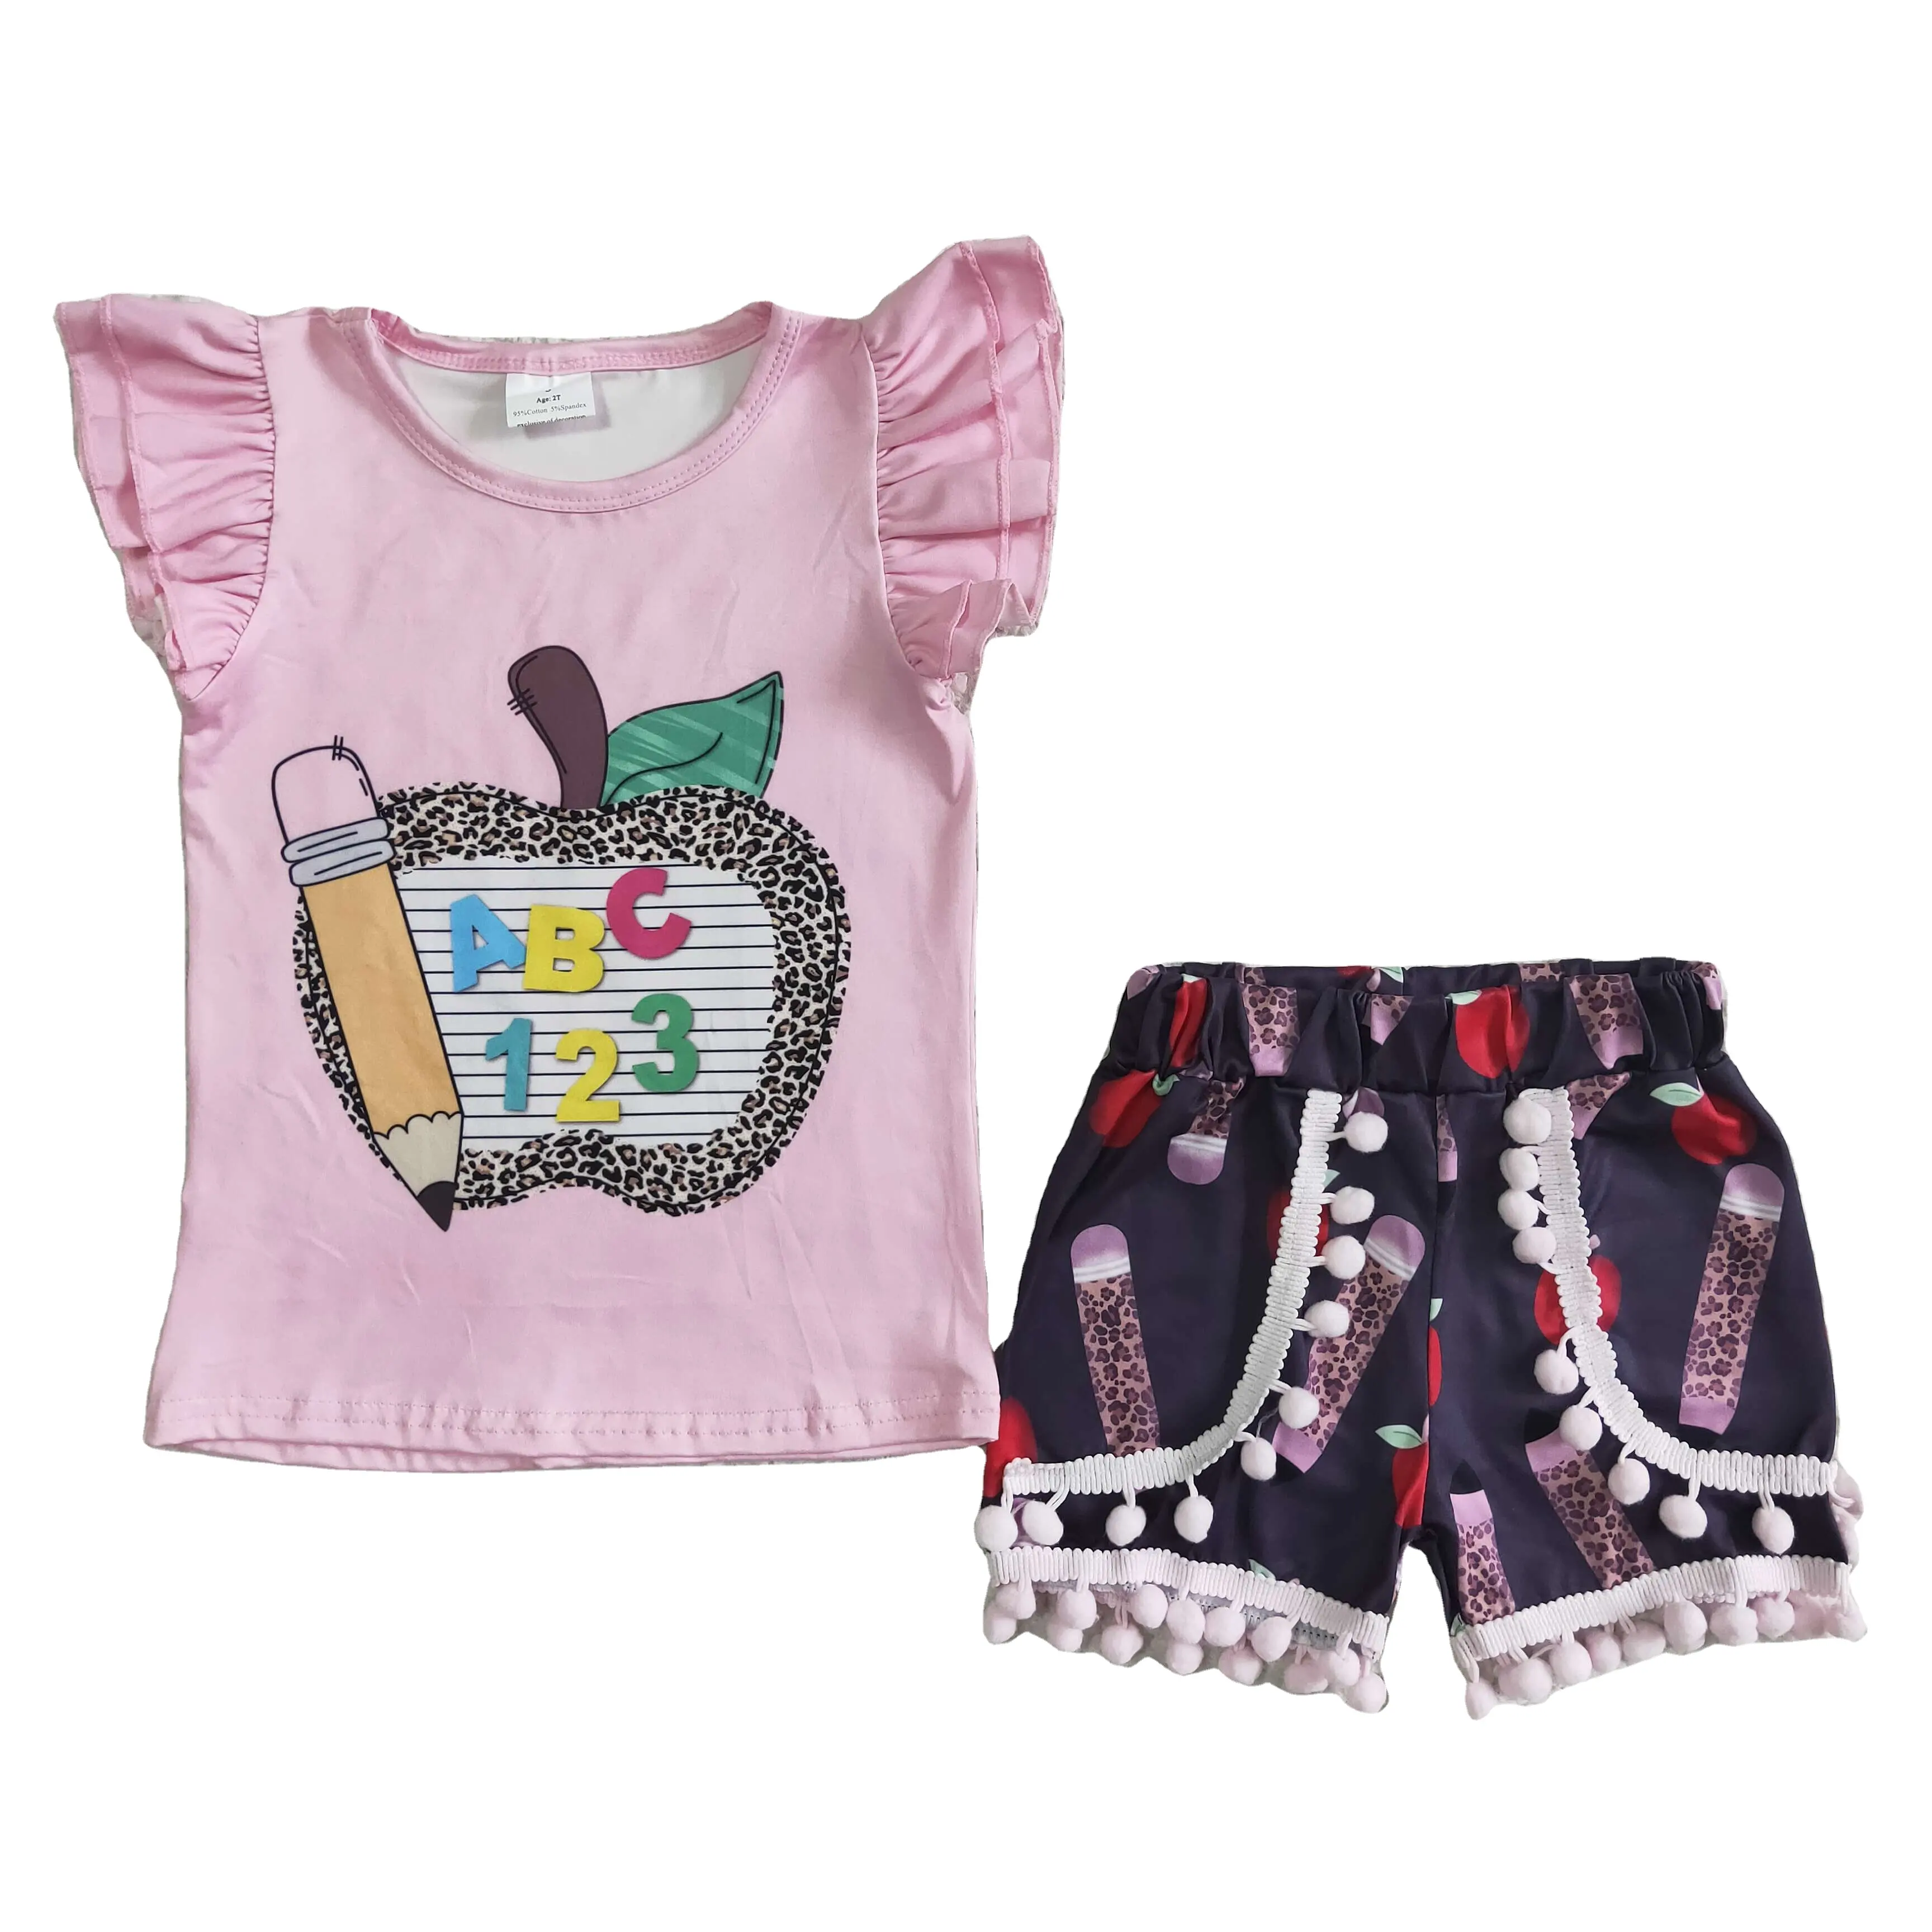 cheap china wholesale kids clothing back to school pink outfits 8 year old girl clothes